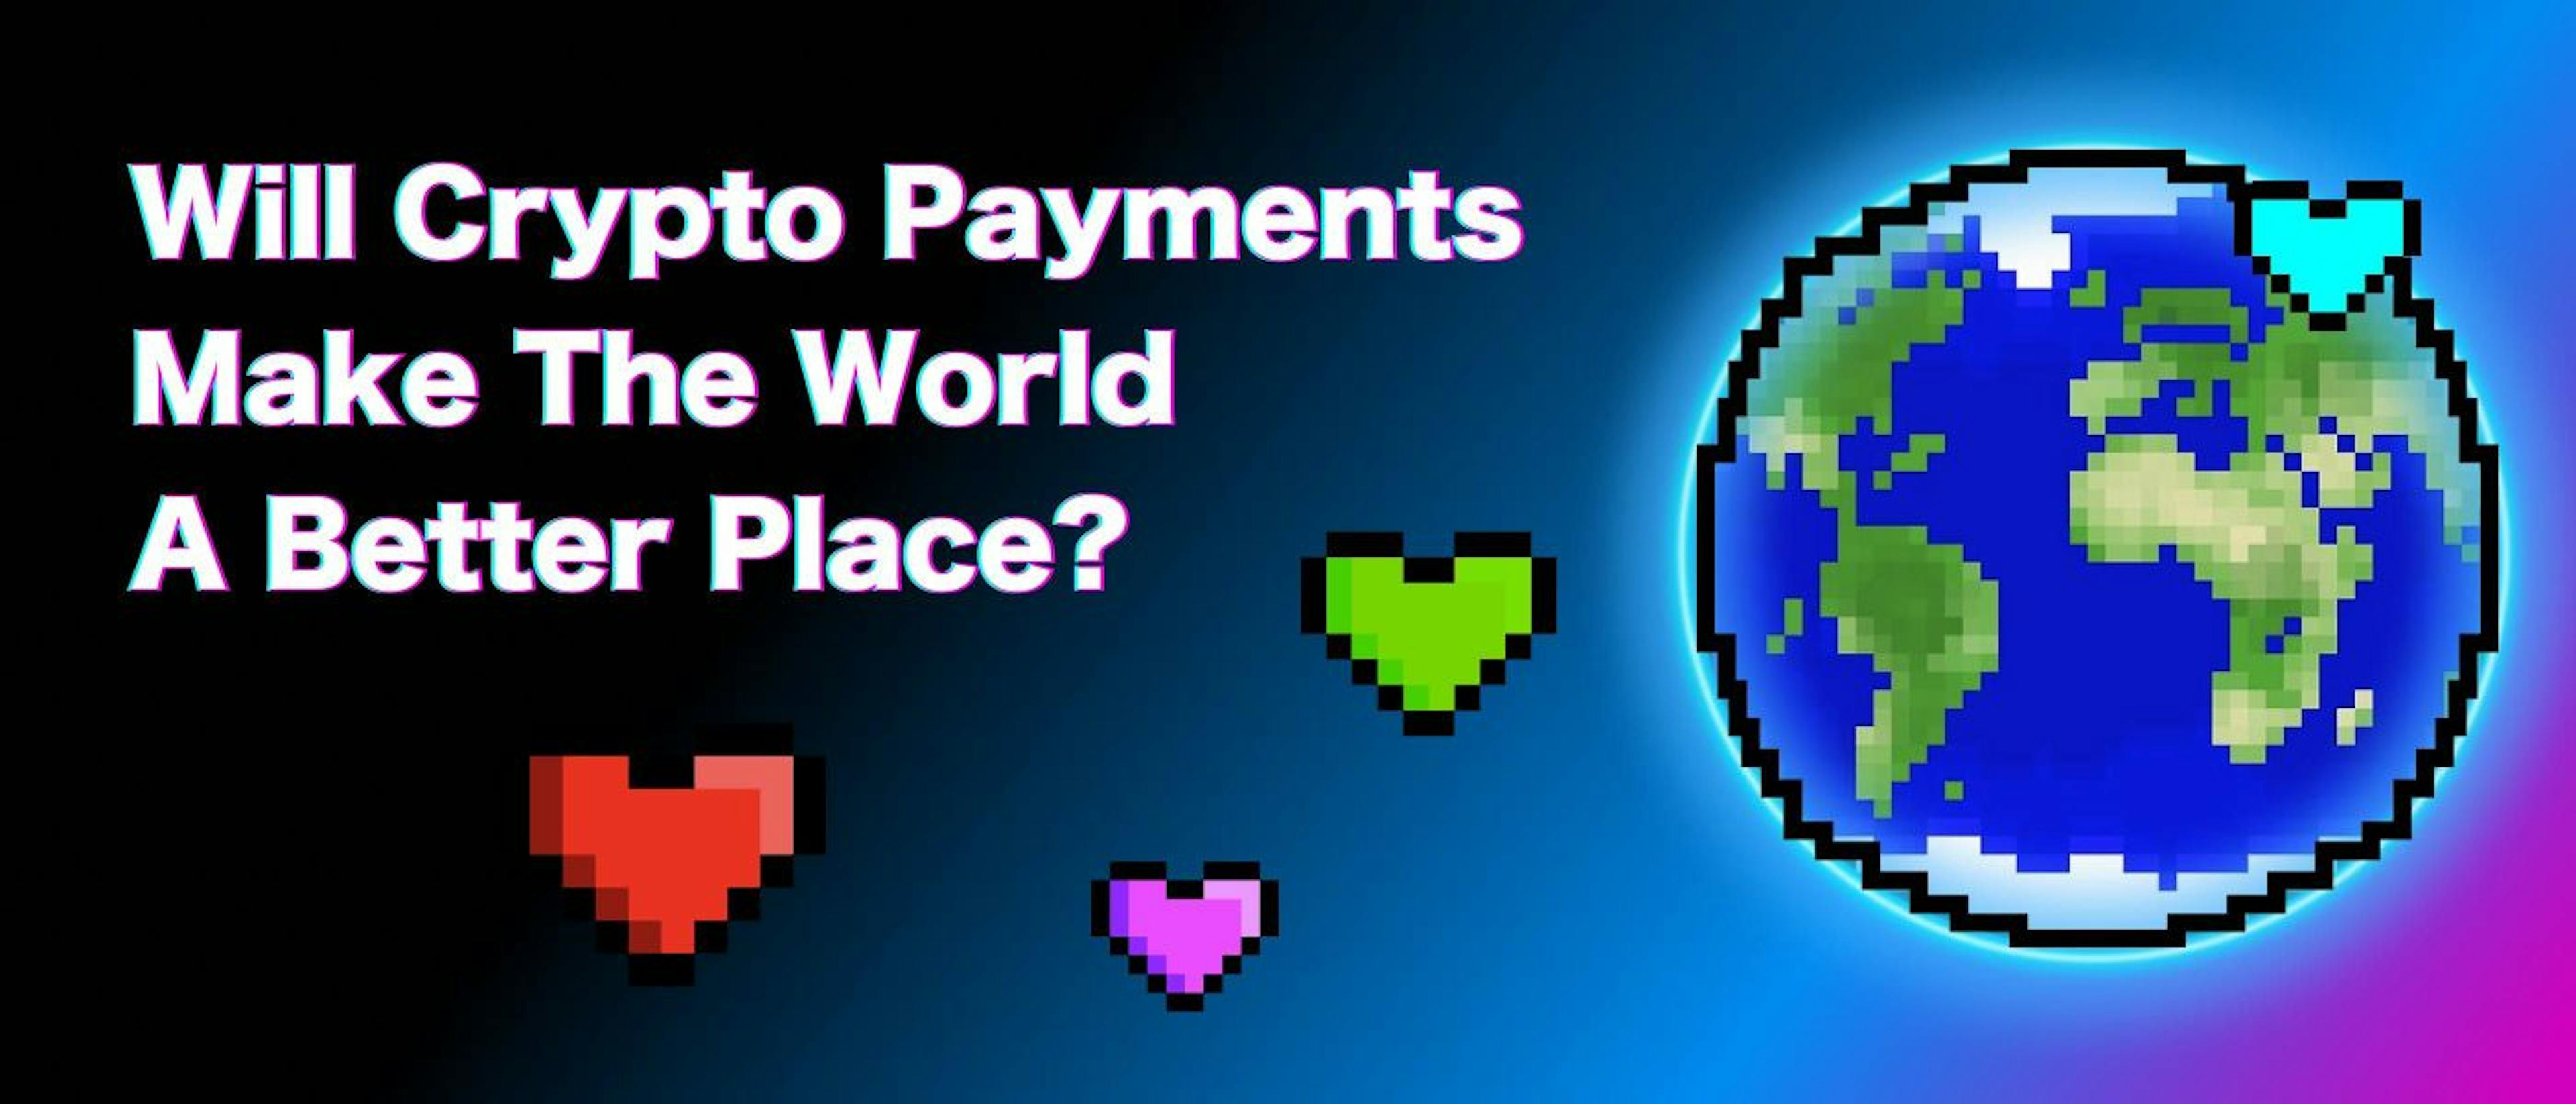 /will-crypto-payments-make-the-world-a-better-place feature image